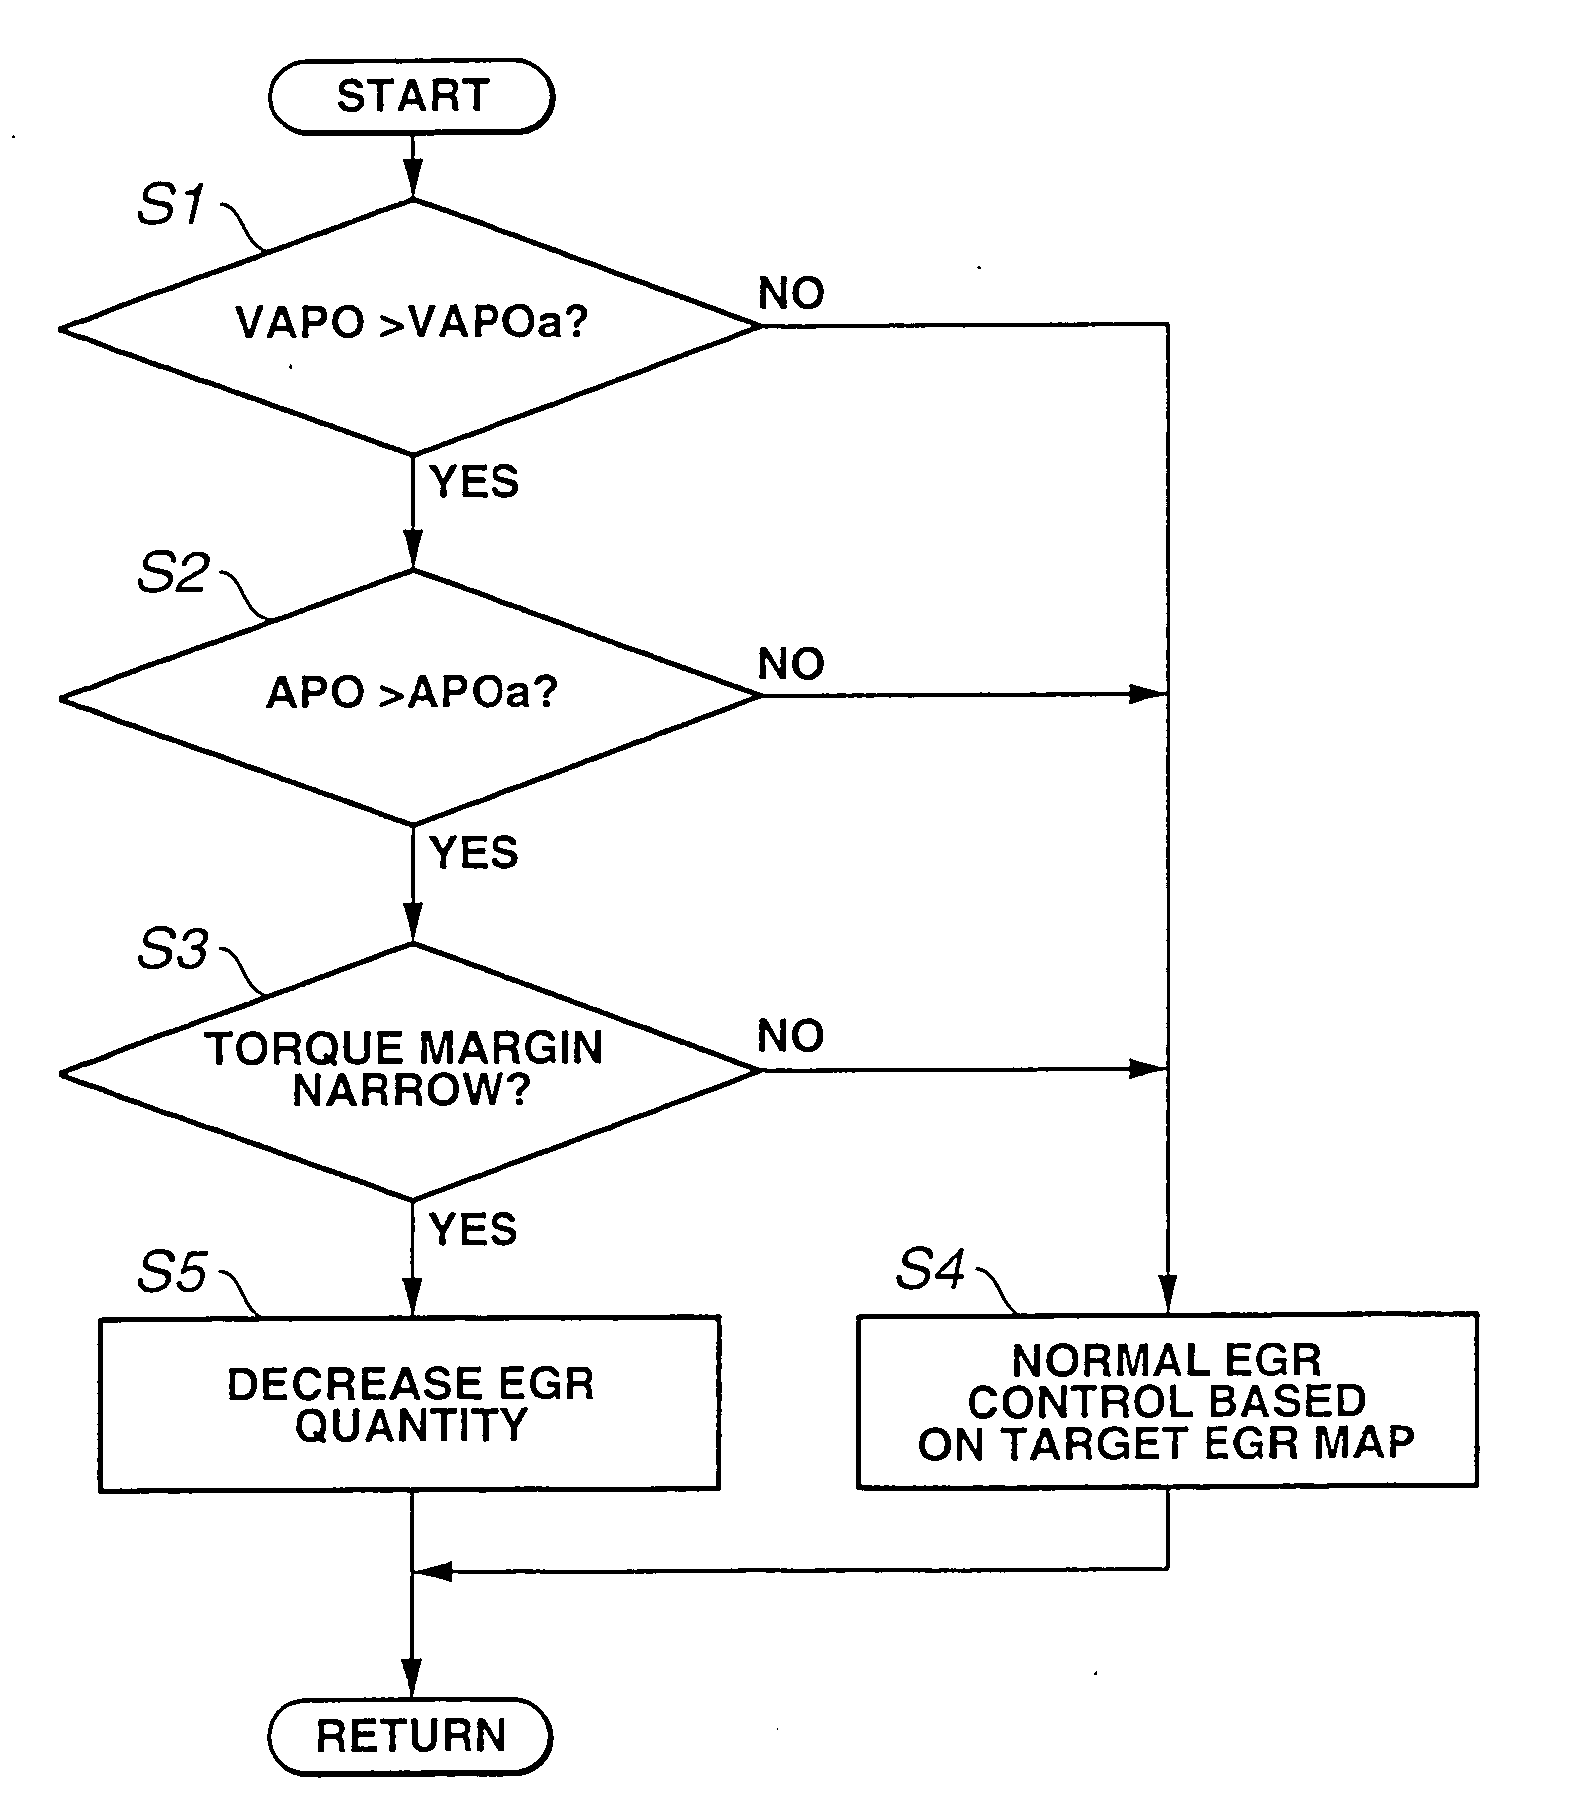 Control apparatus and process for internal combustion engine